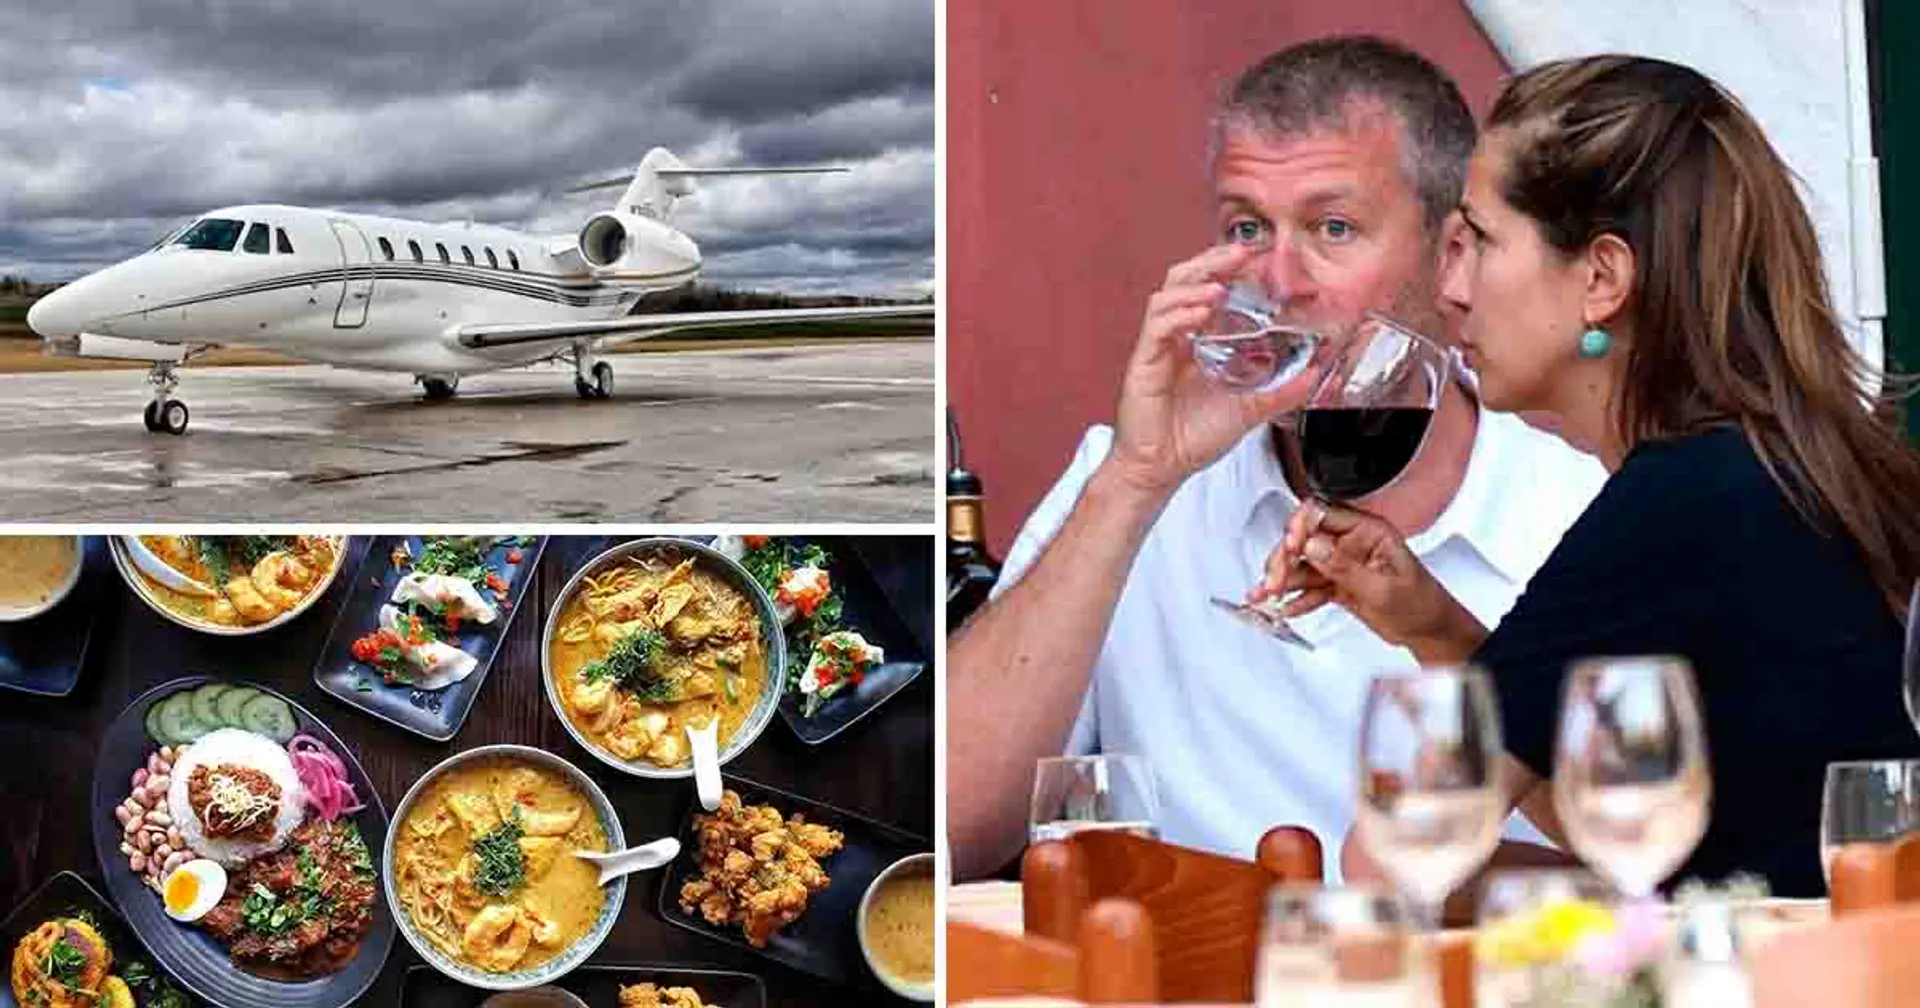 Chelsea former owner Abramovich spent £40,000 to fly takeaway food from his favourite London restaurant to Azerbaijan